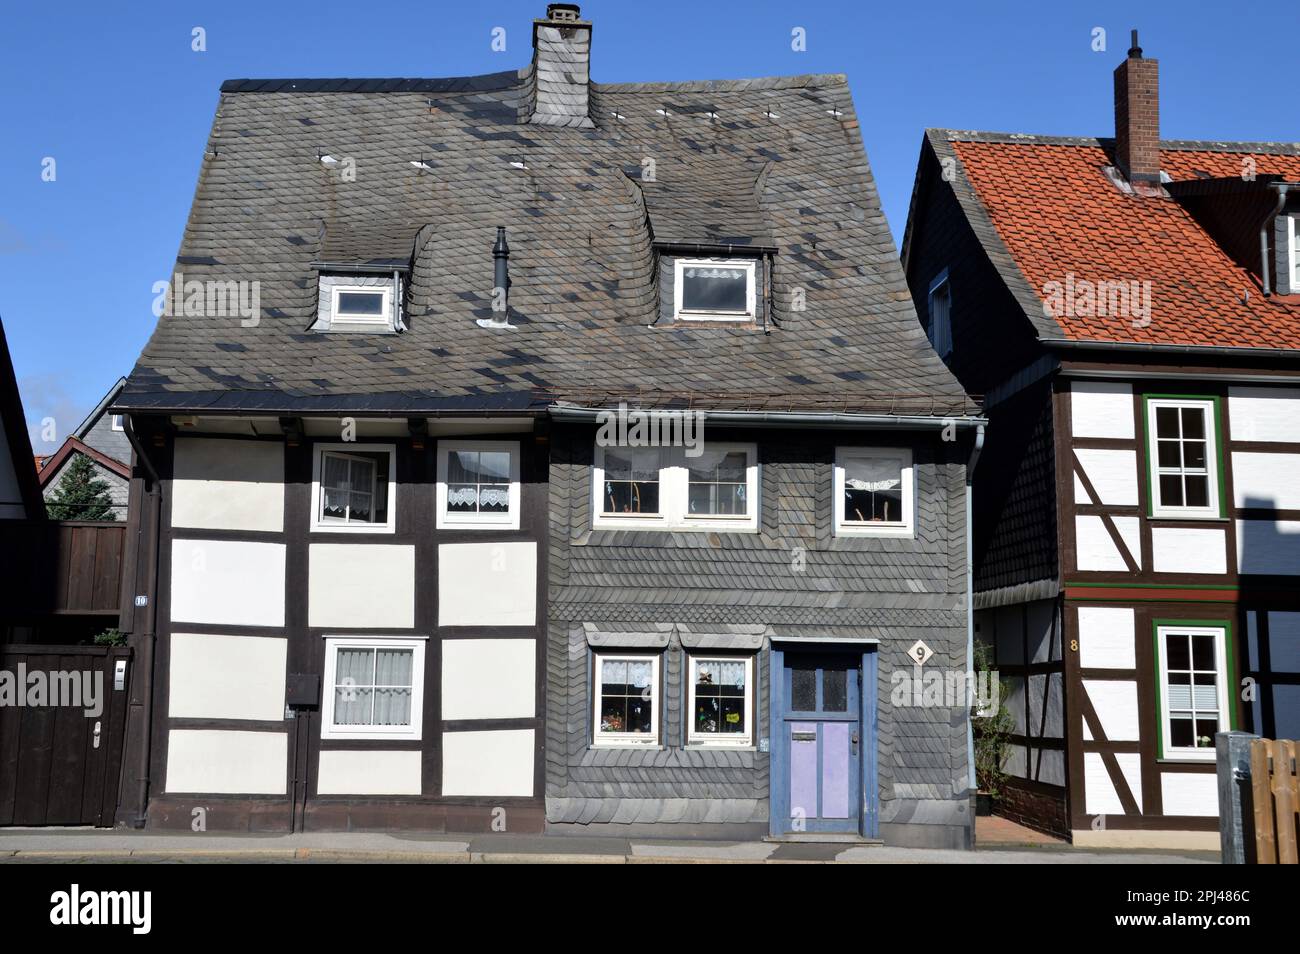 Germany, Lower Saxony, Goslar:  semi-detached timber-frame houses, one with ornate slate-cladding, a local tradition. Stock Photo